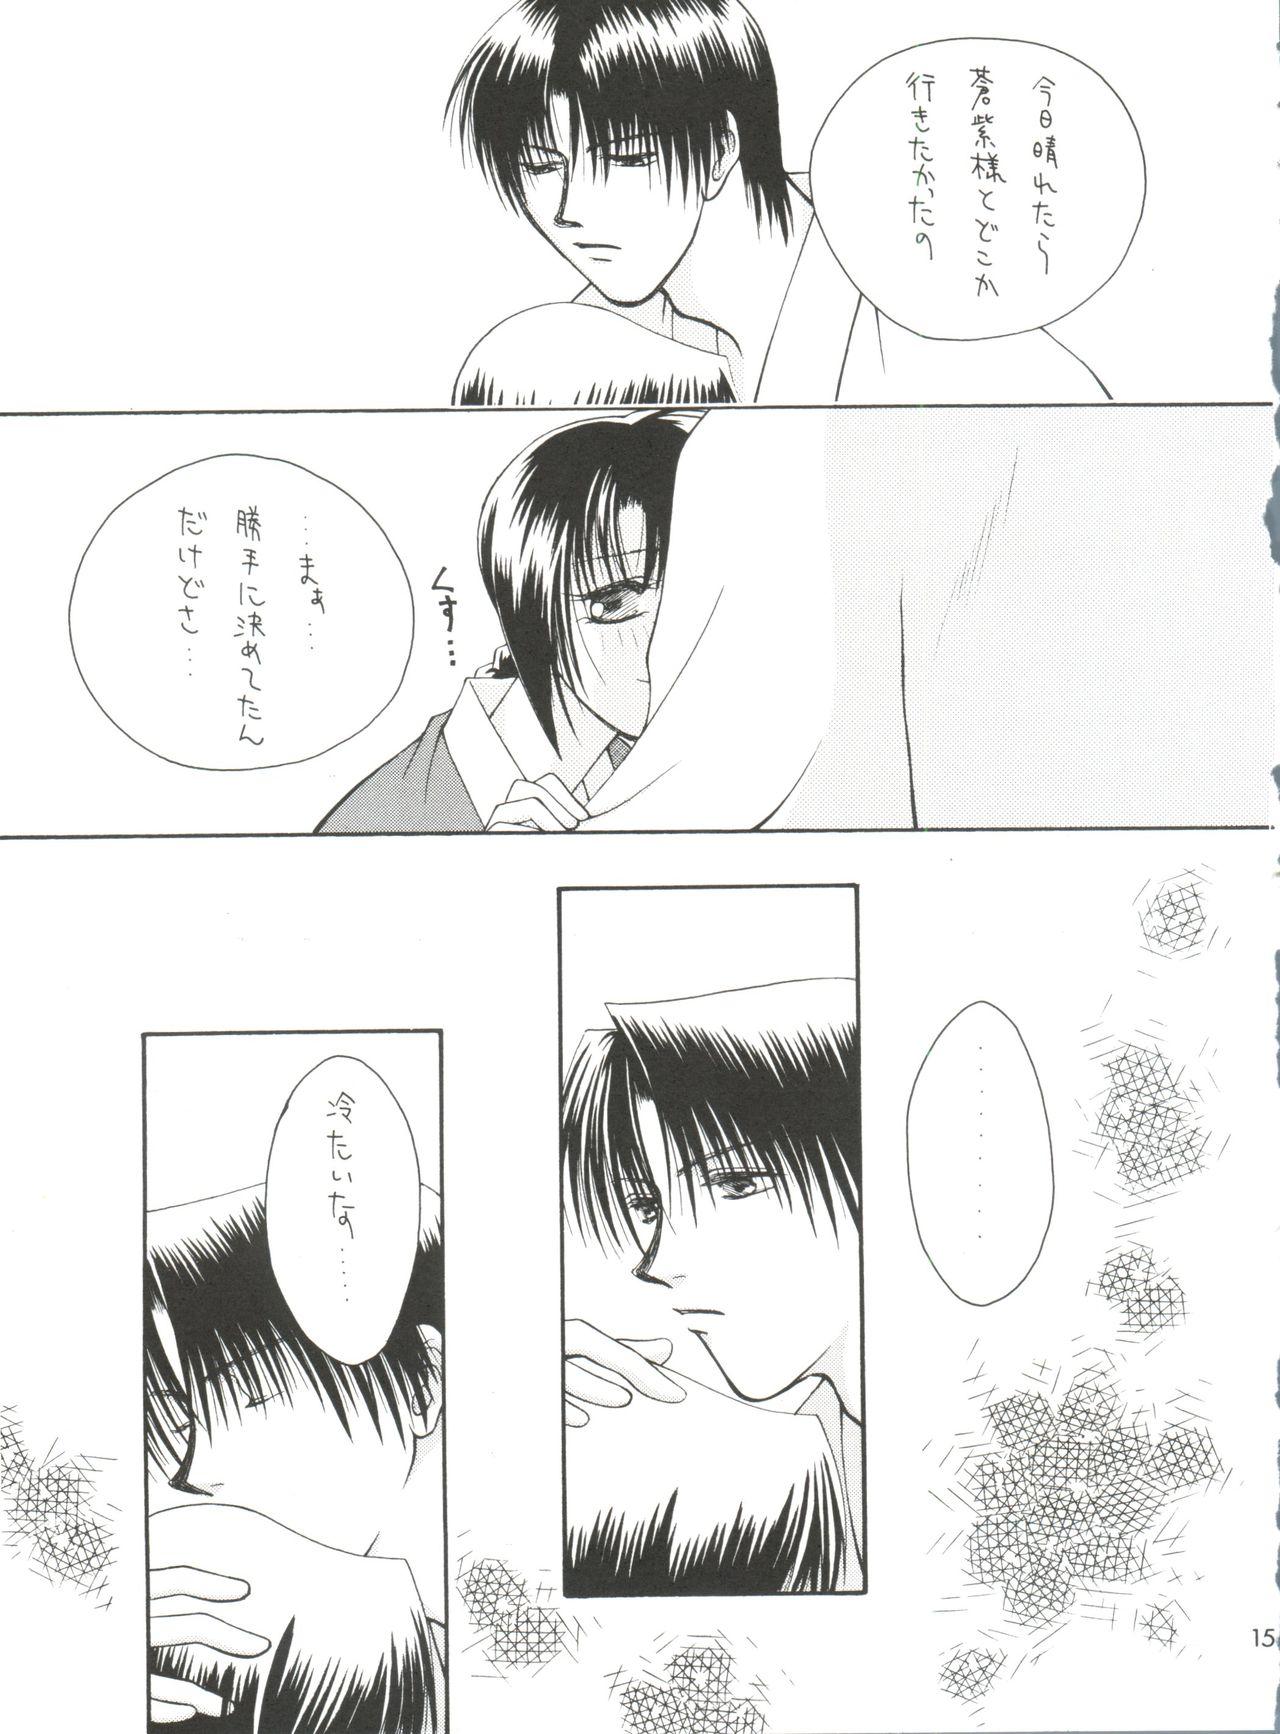 Ejaculation replay - Rurouni kenshin Exposed - Page 6